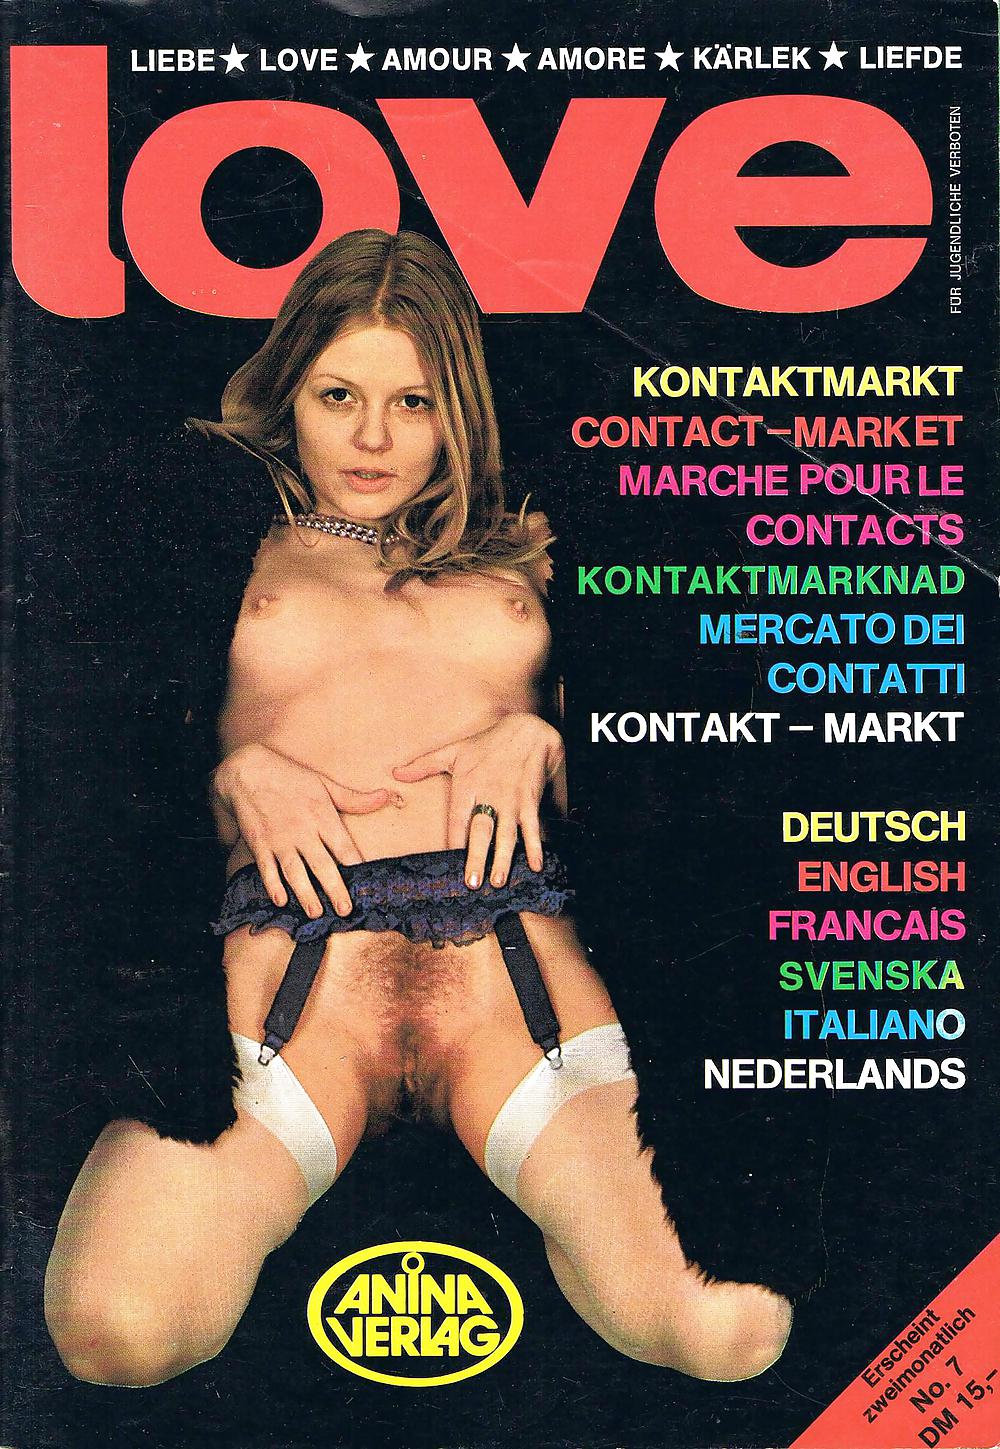 Anne Magle danish pornstar from the 70s #2691878